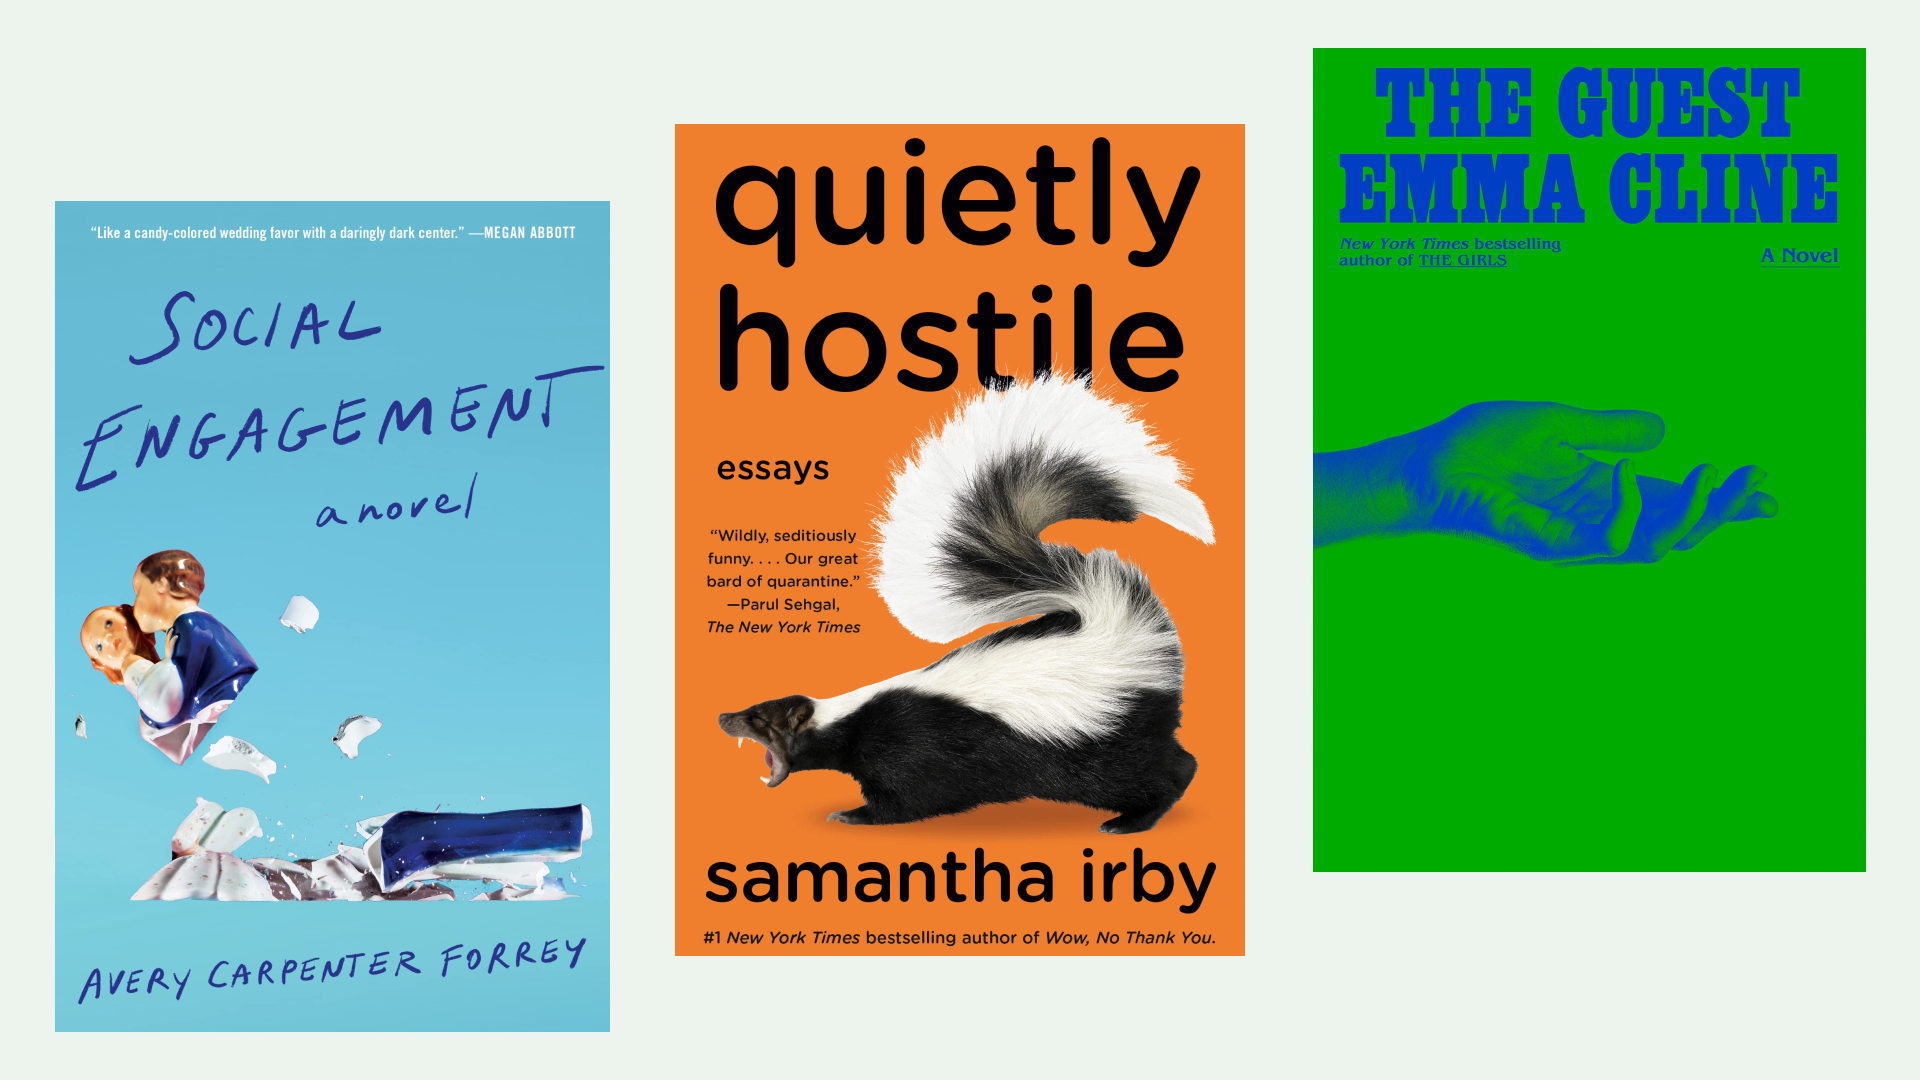 Book covers of "Social Engagement," "Quietly Hostile," and "The Guest"